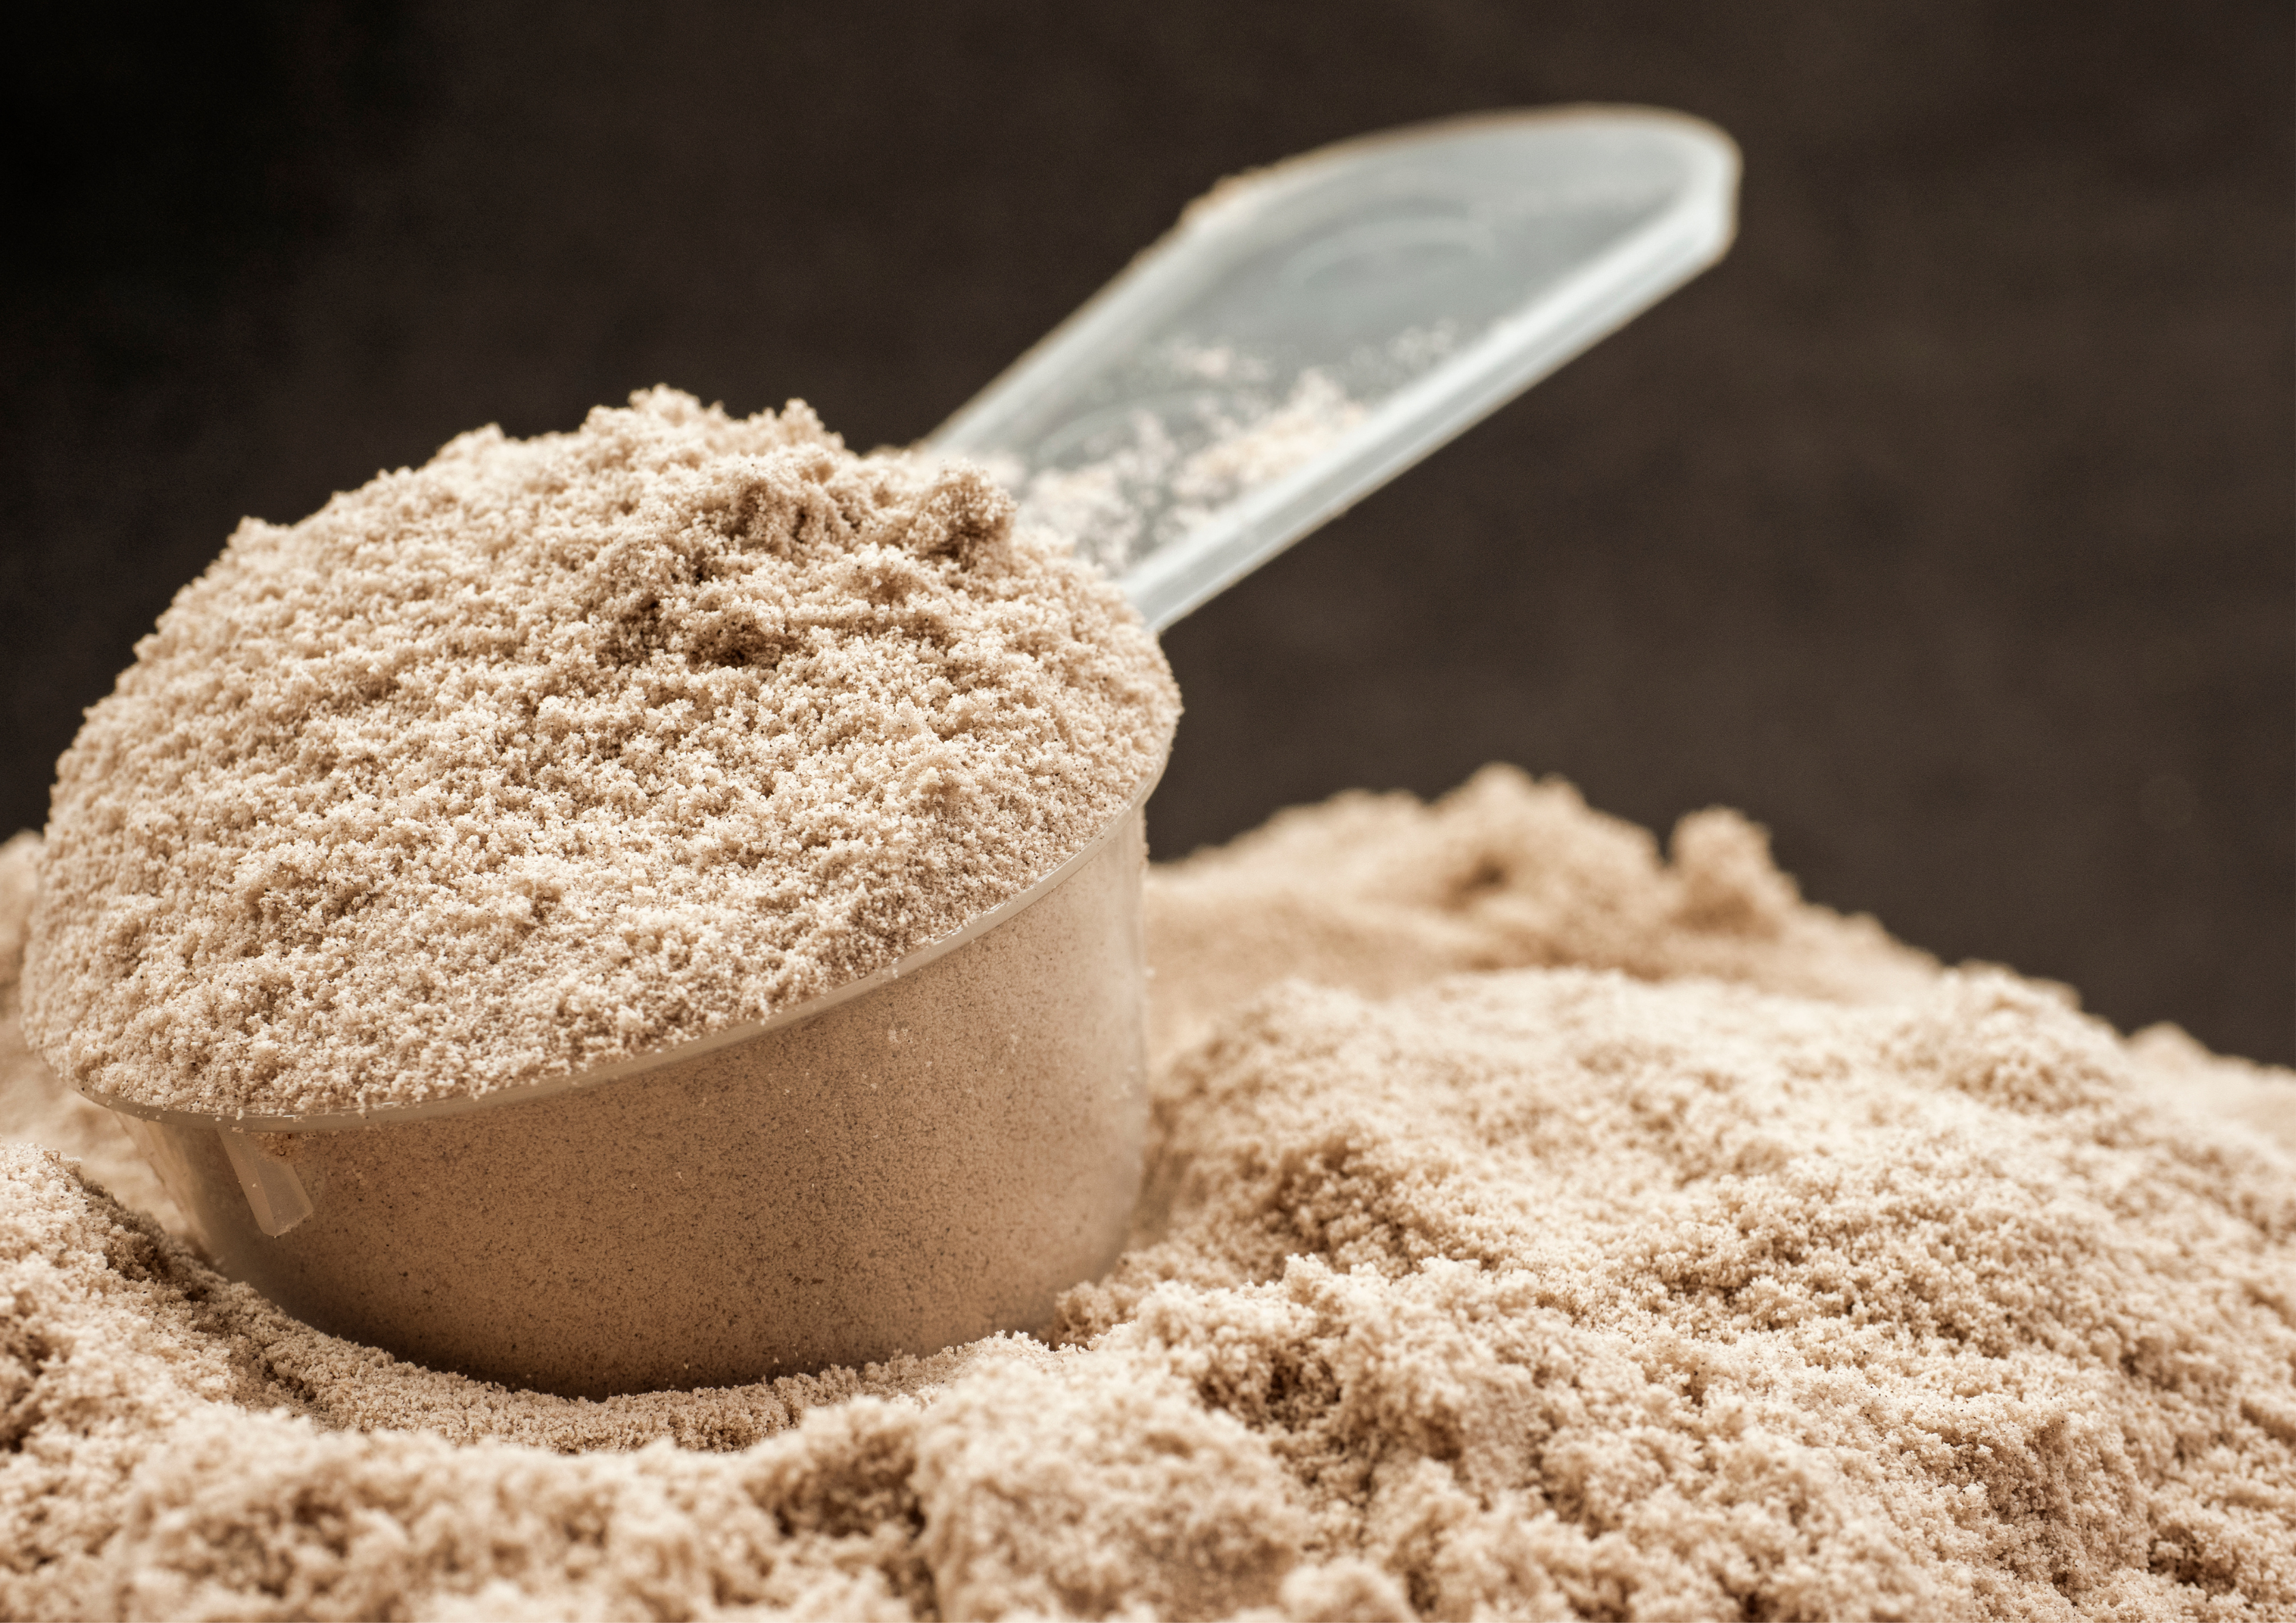 PLANT-BASED PROTEIN POWDER FOR SMOOTHIES